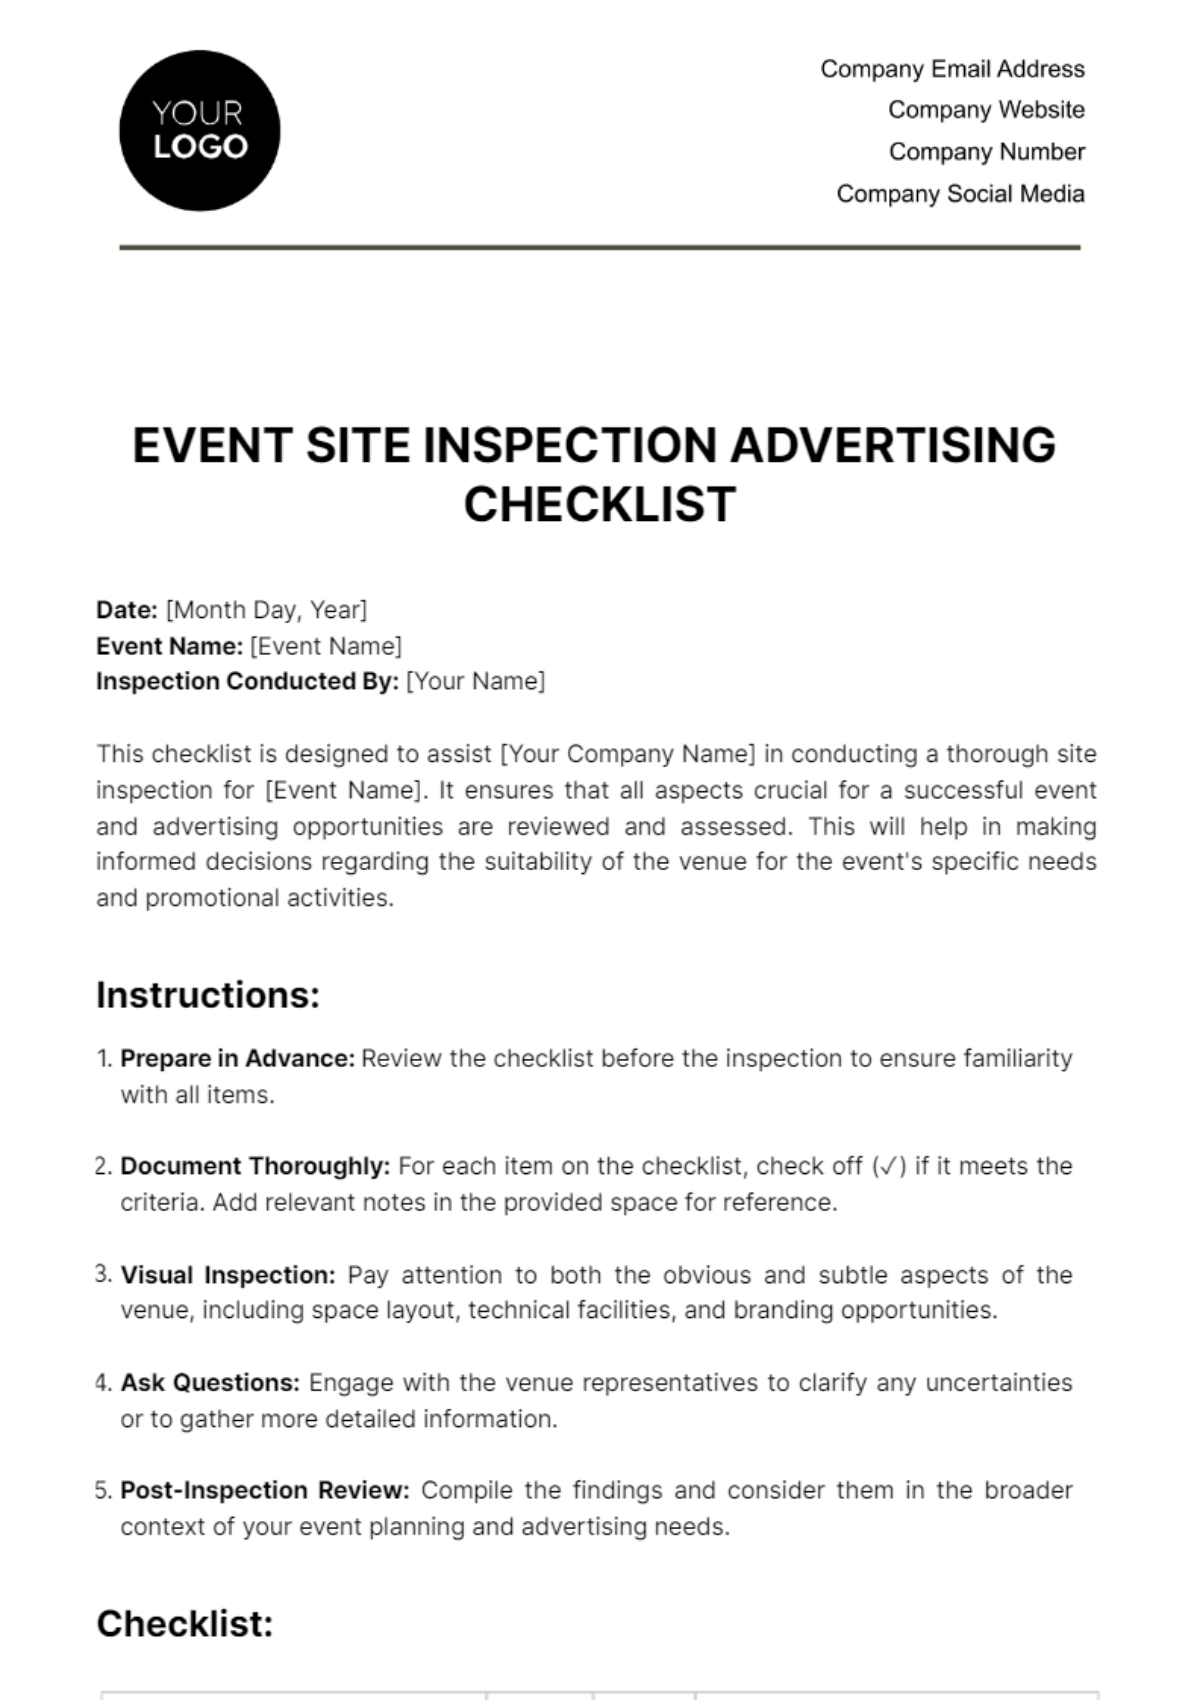 Free Event Site Inspection Advertising Checklist Template